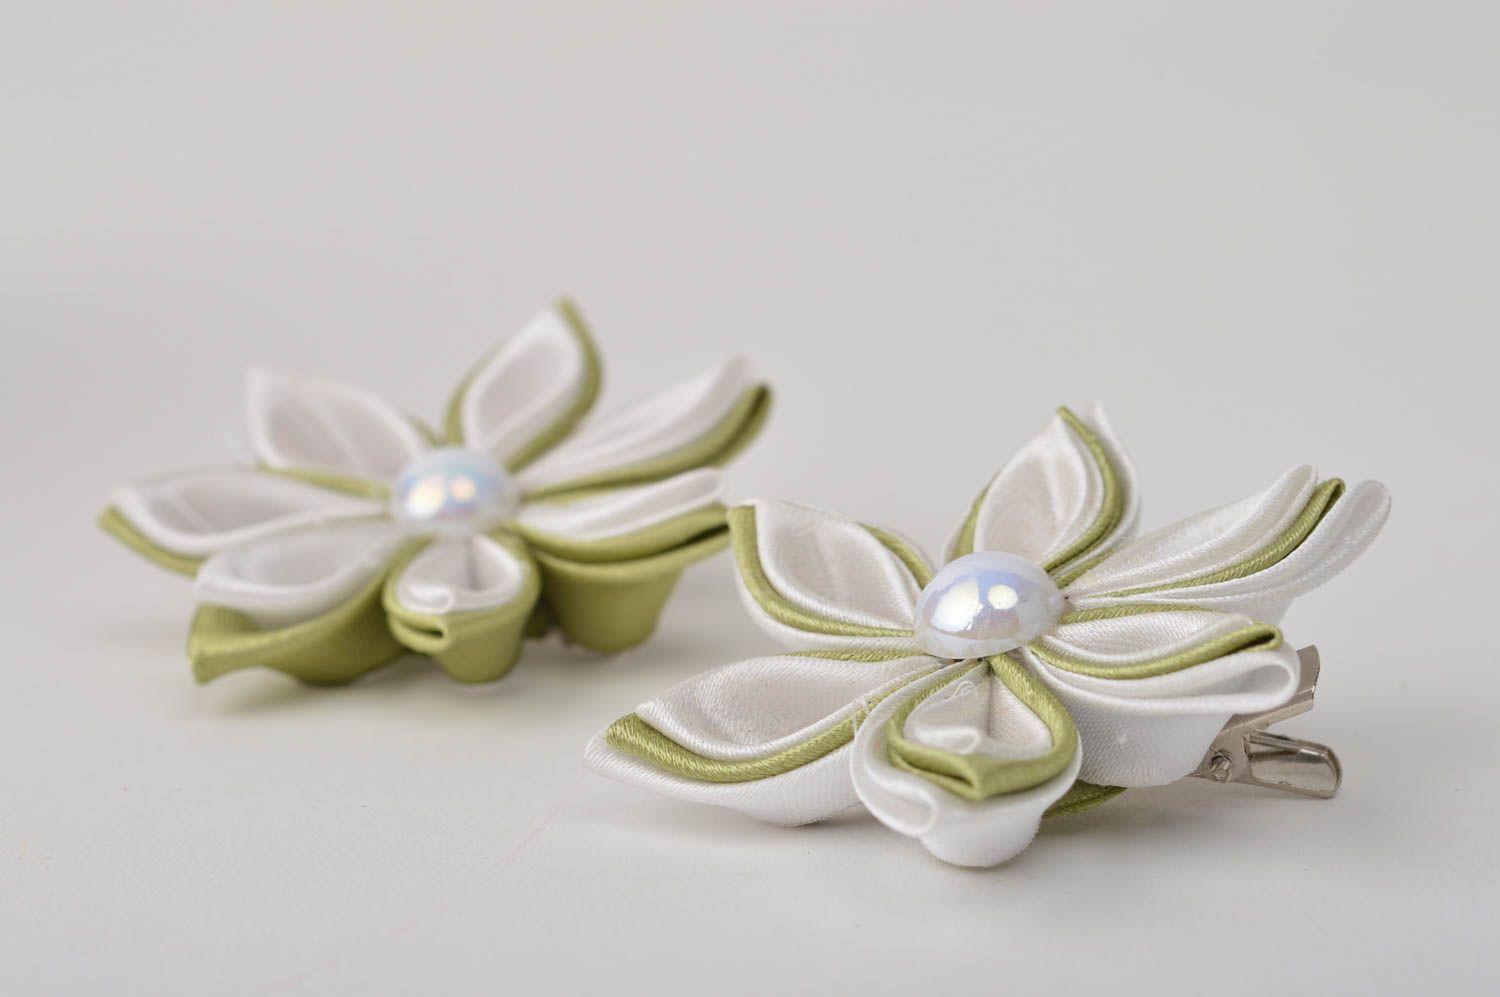 Handmade hair accessories jewelry set kanzashi flowers hair clips gifts for her photo 8